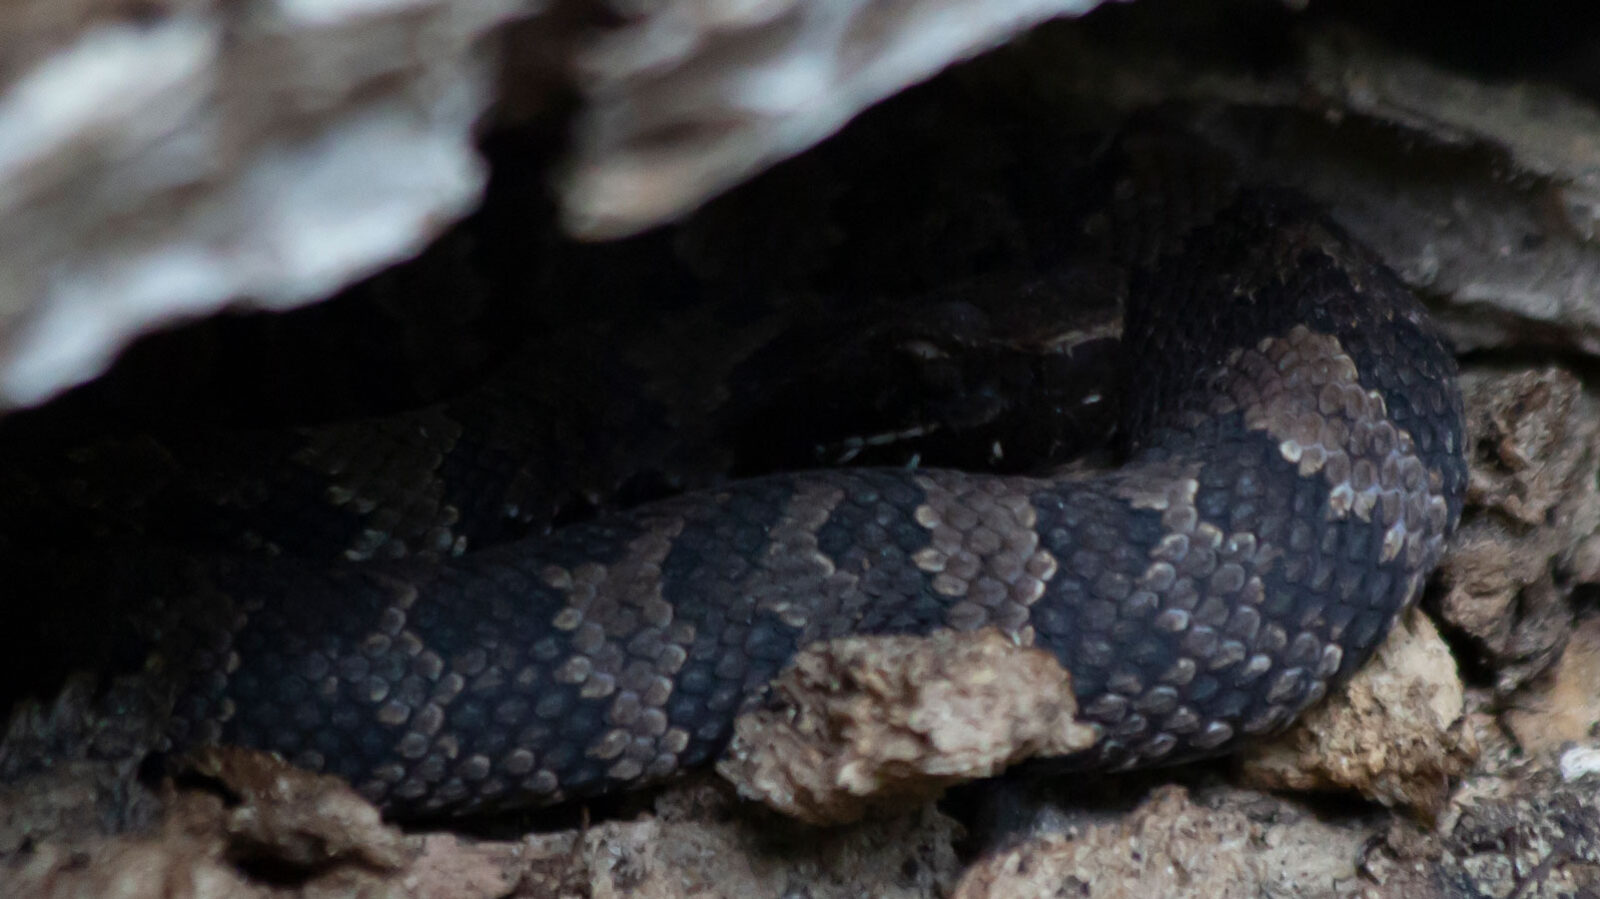 Young cottonmouth resting watchfully under a log ledge